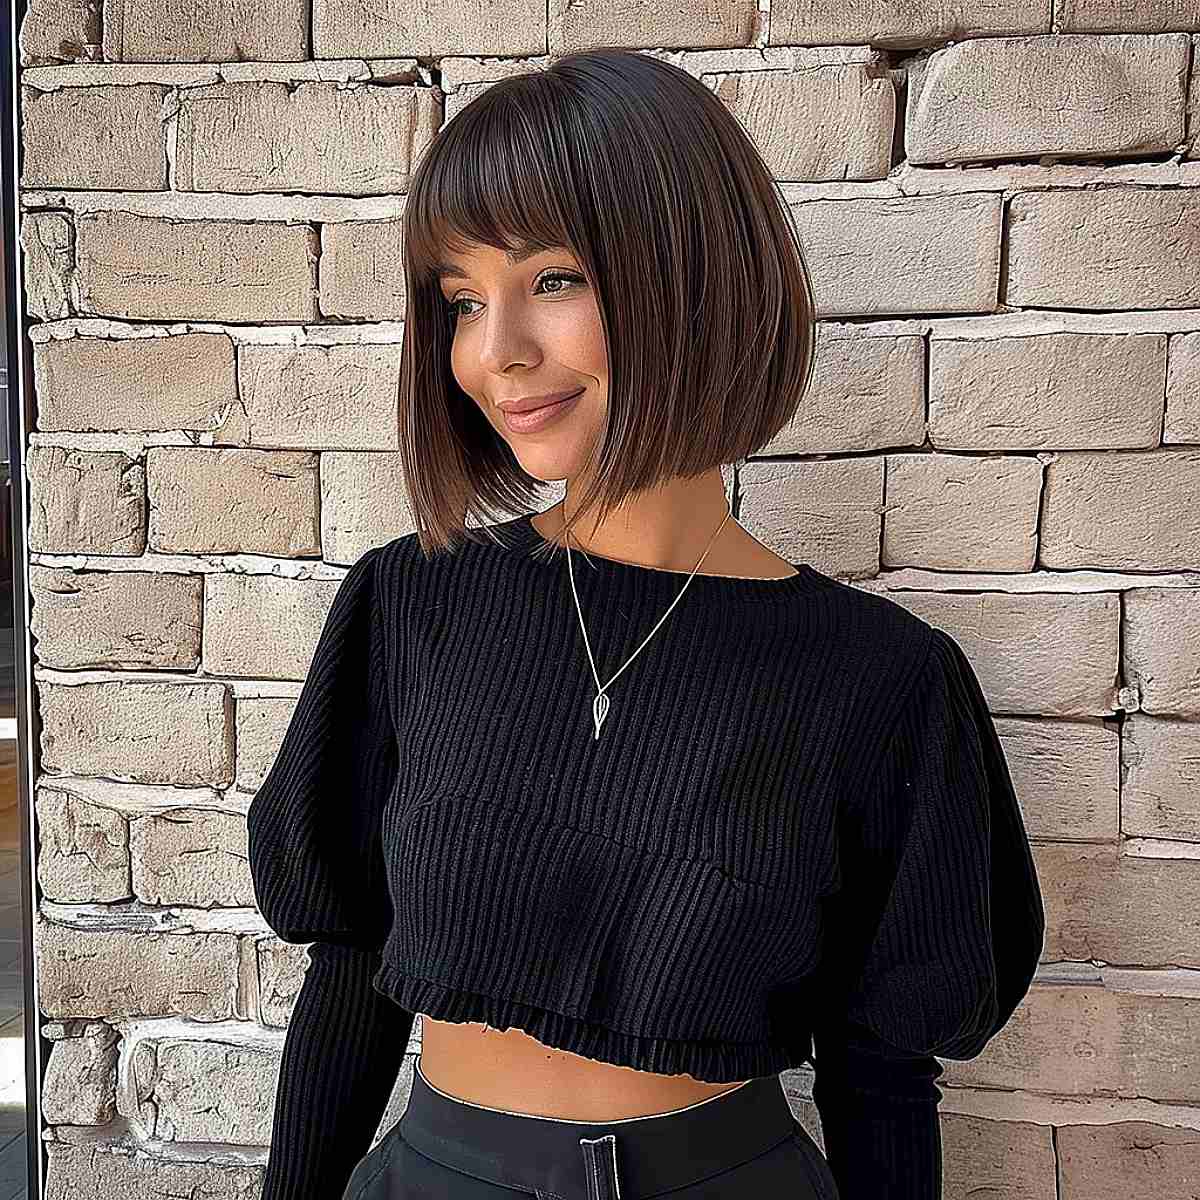 Classic Chin-Length Bob with Bangs Hairstyle